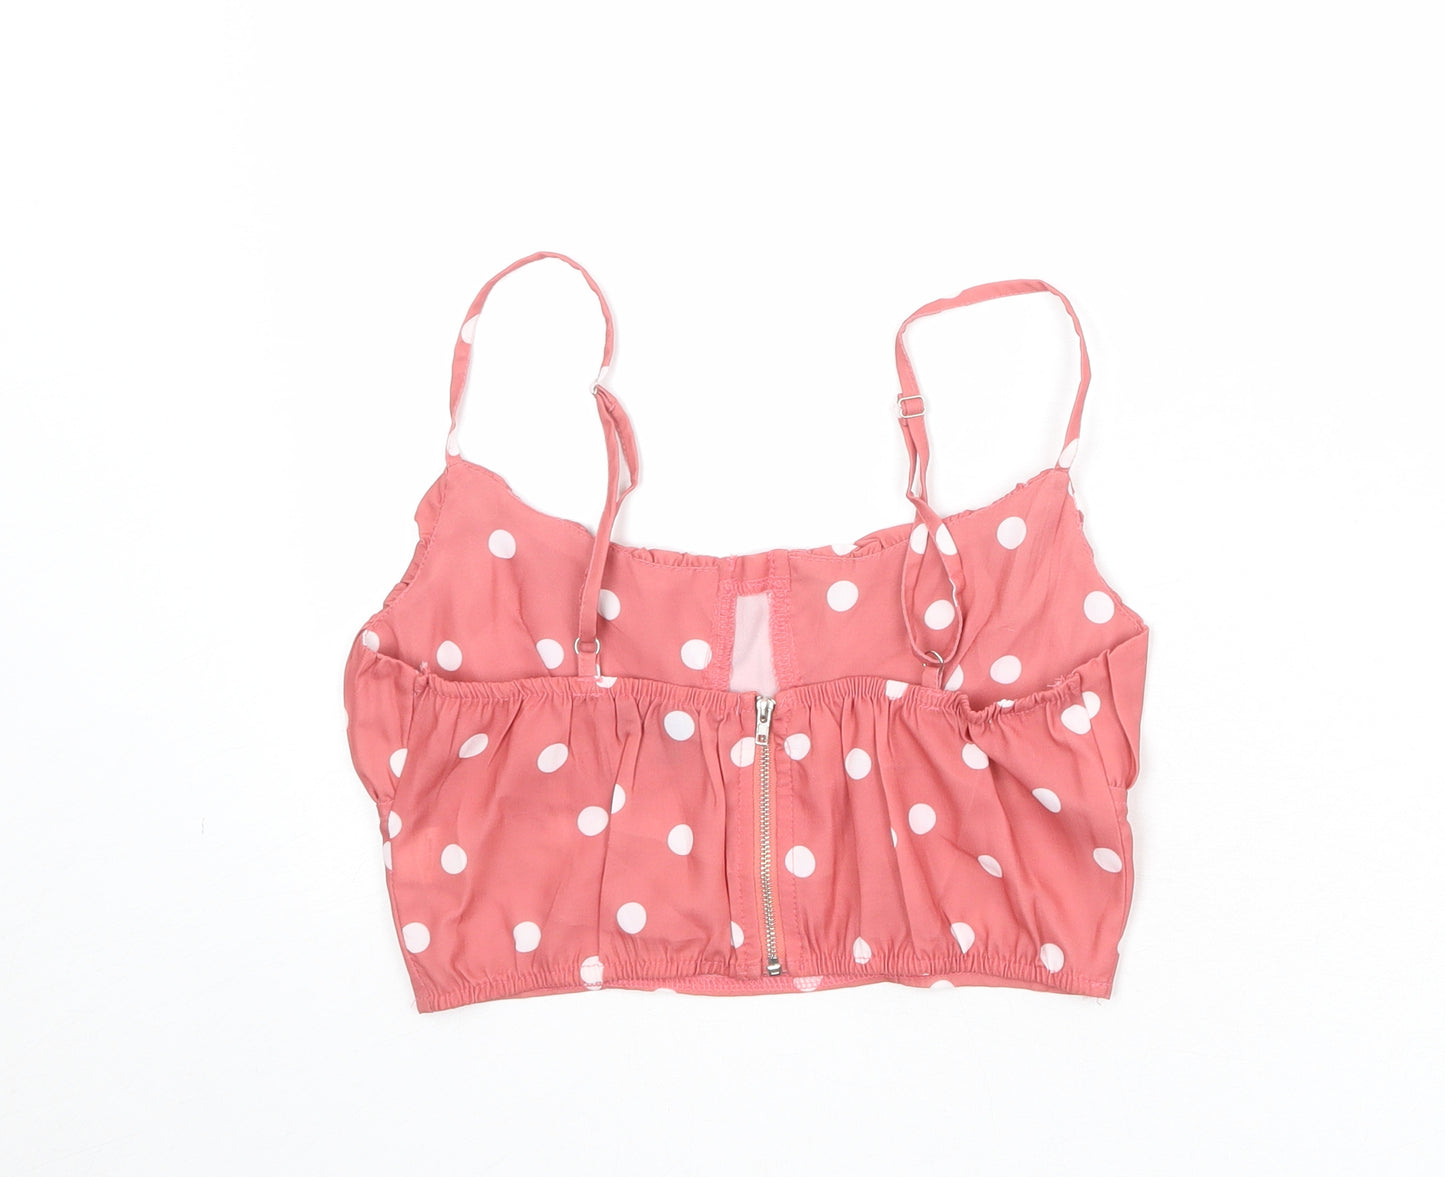 Missguided Womens Pink Polka Dot Polyester Cropped Tank Size 6 Scoop Neck - Bralette